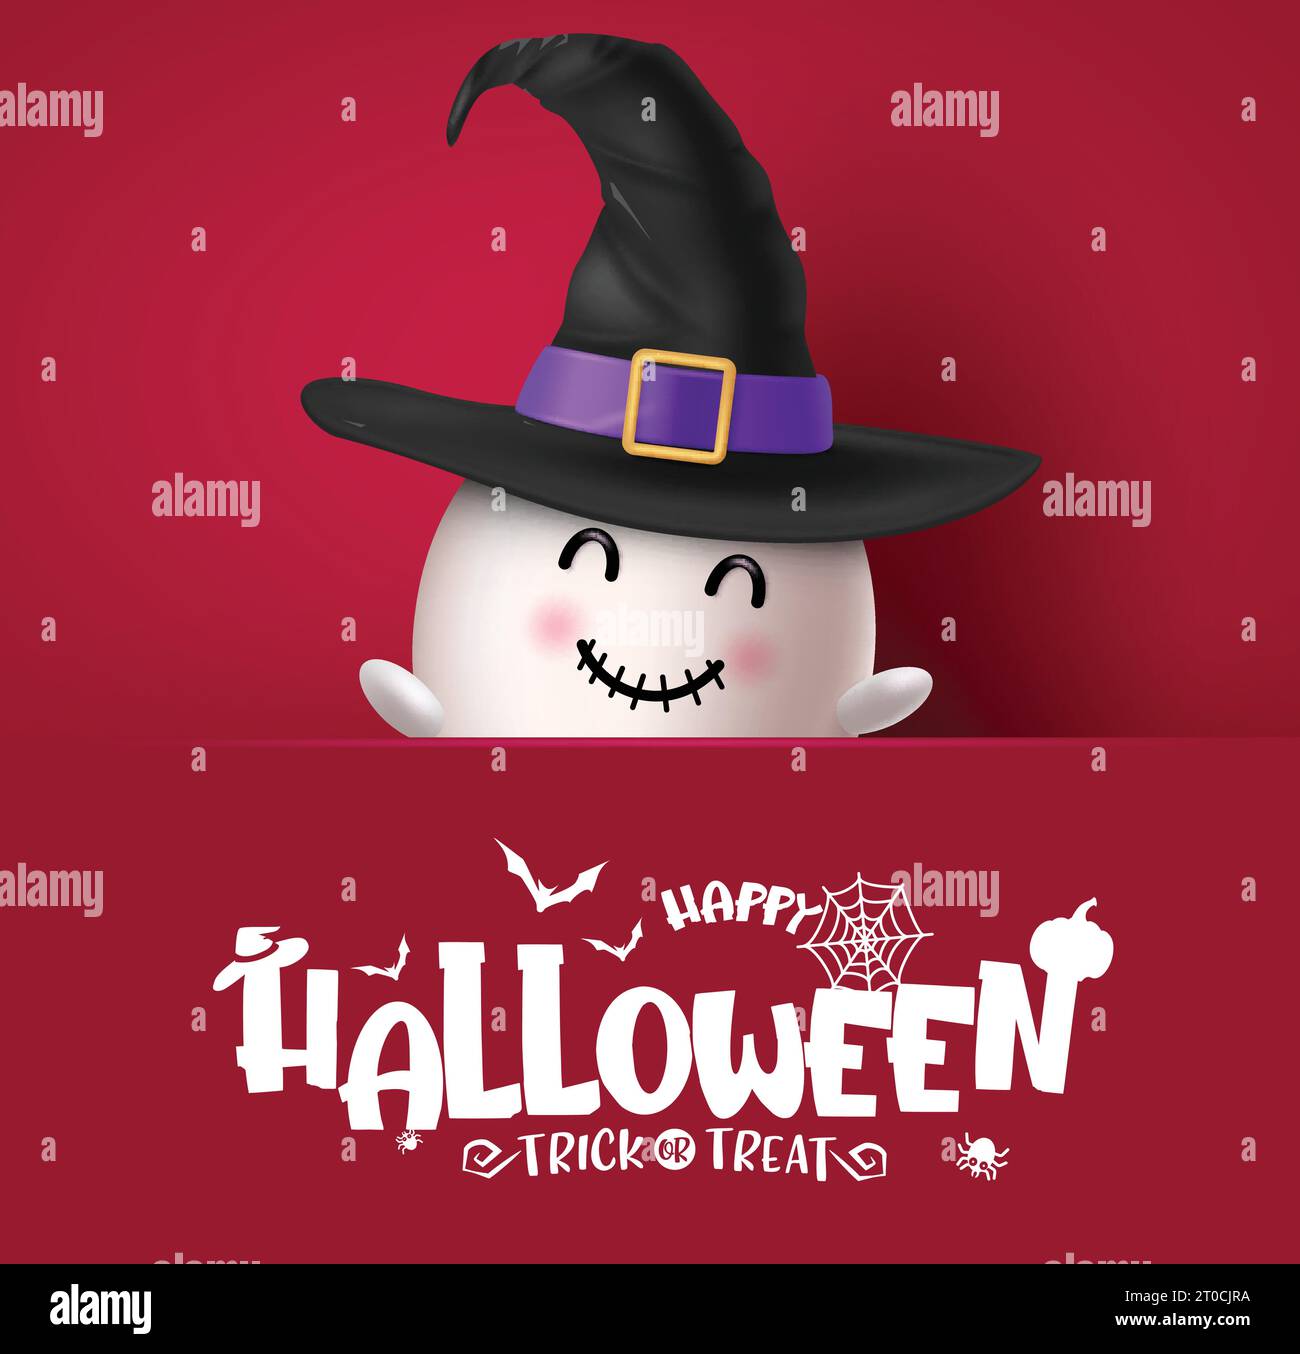 Happy halloween text vector template design. Halloween ghost friendly cute character for horror holiday greeting card in red background. Vector Stock Vector